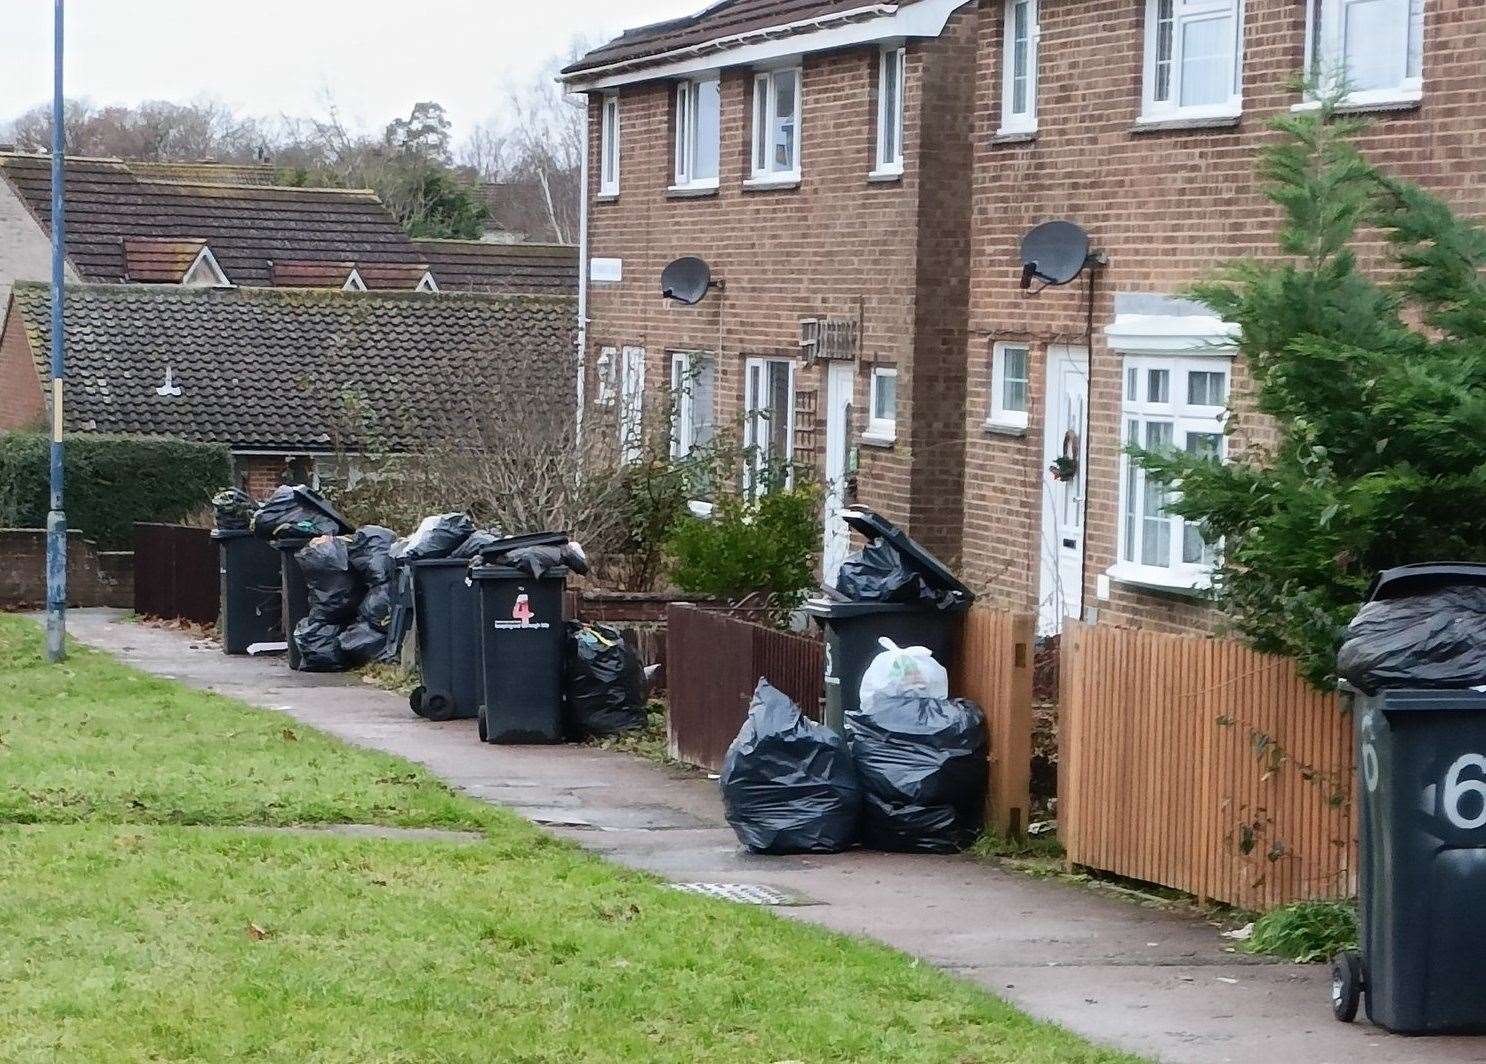 Bins in Maidstone that were supposed to be collected two weeks ago. Picture: @TubeScott1984